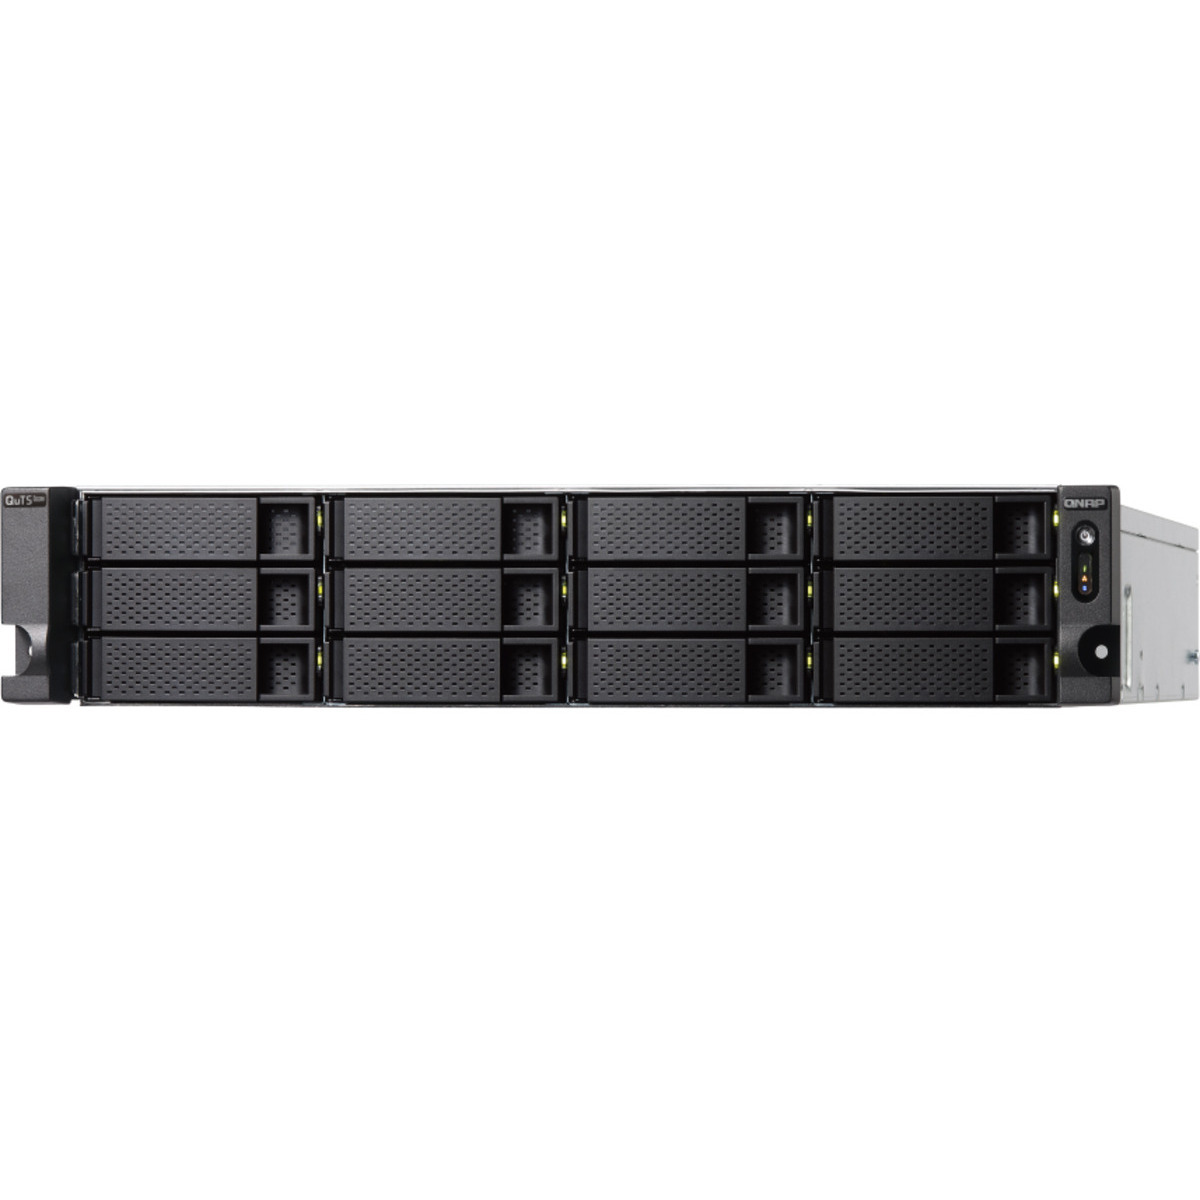 buy $10177 QNAP TS-h1886XU-RP R2 QuTS hero Edition 264tb RackMount NAS - Network Attached Storage Device 12x22000gb Seagate IronWolf Pro ST22000NT001 3.5 7200rpm SATA 6Gb/s HDD NAS Class Drives Installed - Burn-In Tested - nas headquarters buy network attached storage server device das new raid-5 free shipping simply usa TS-h1886XU-RP R2 QuTS hero Edition